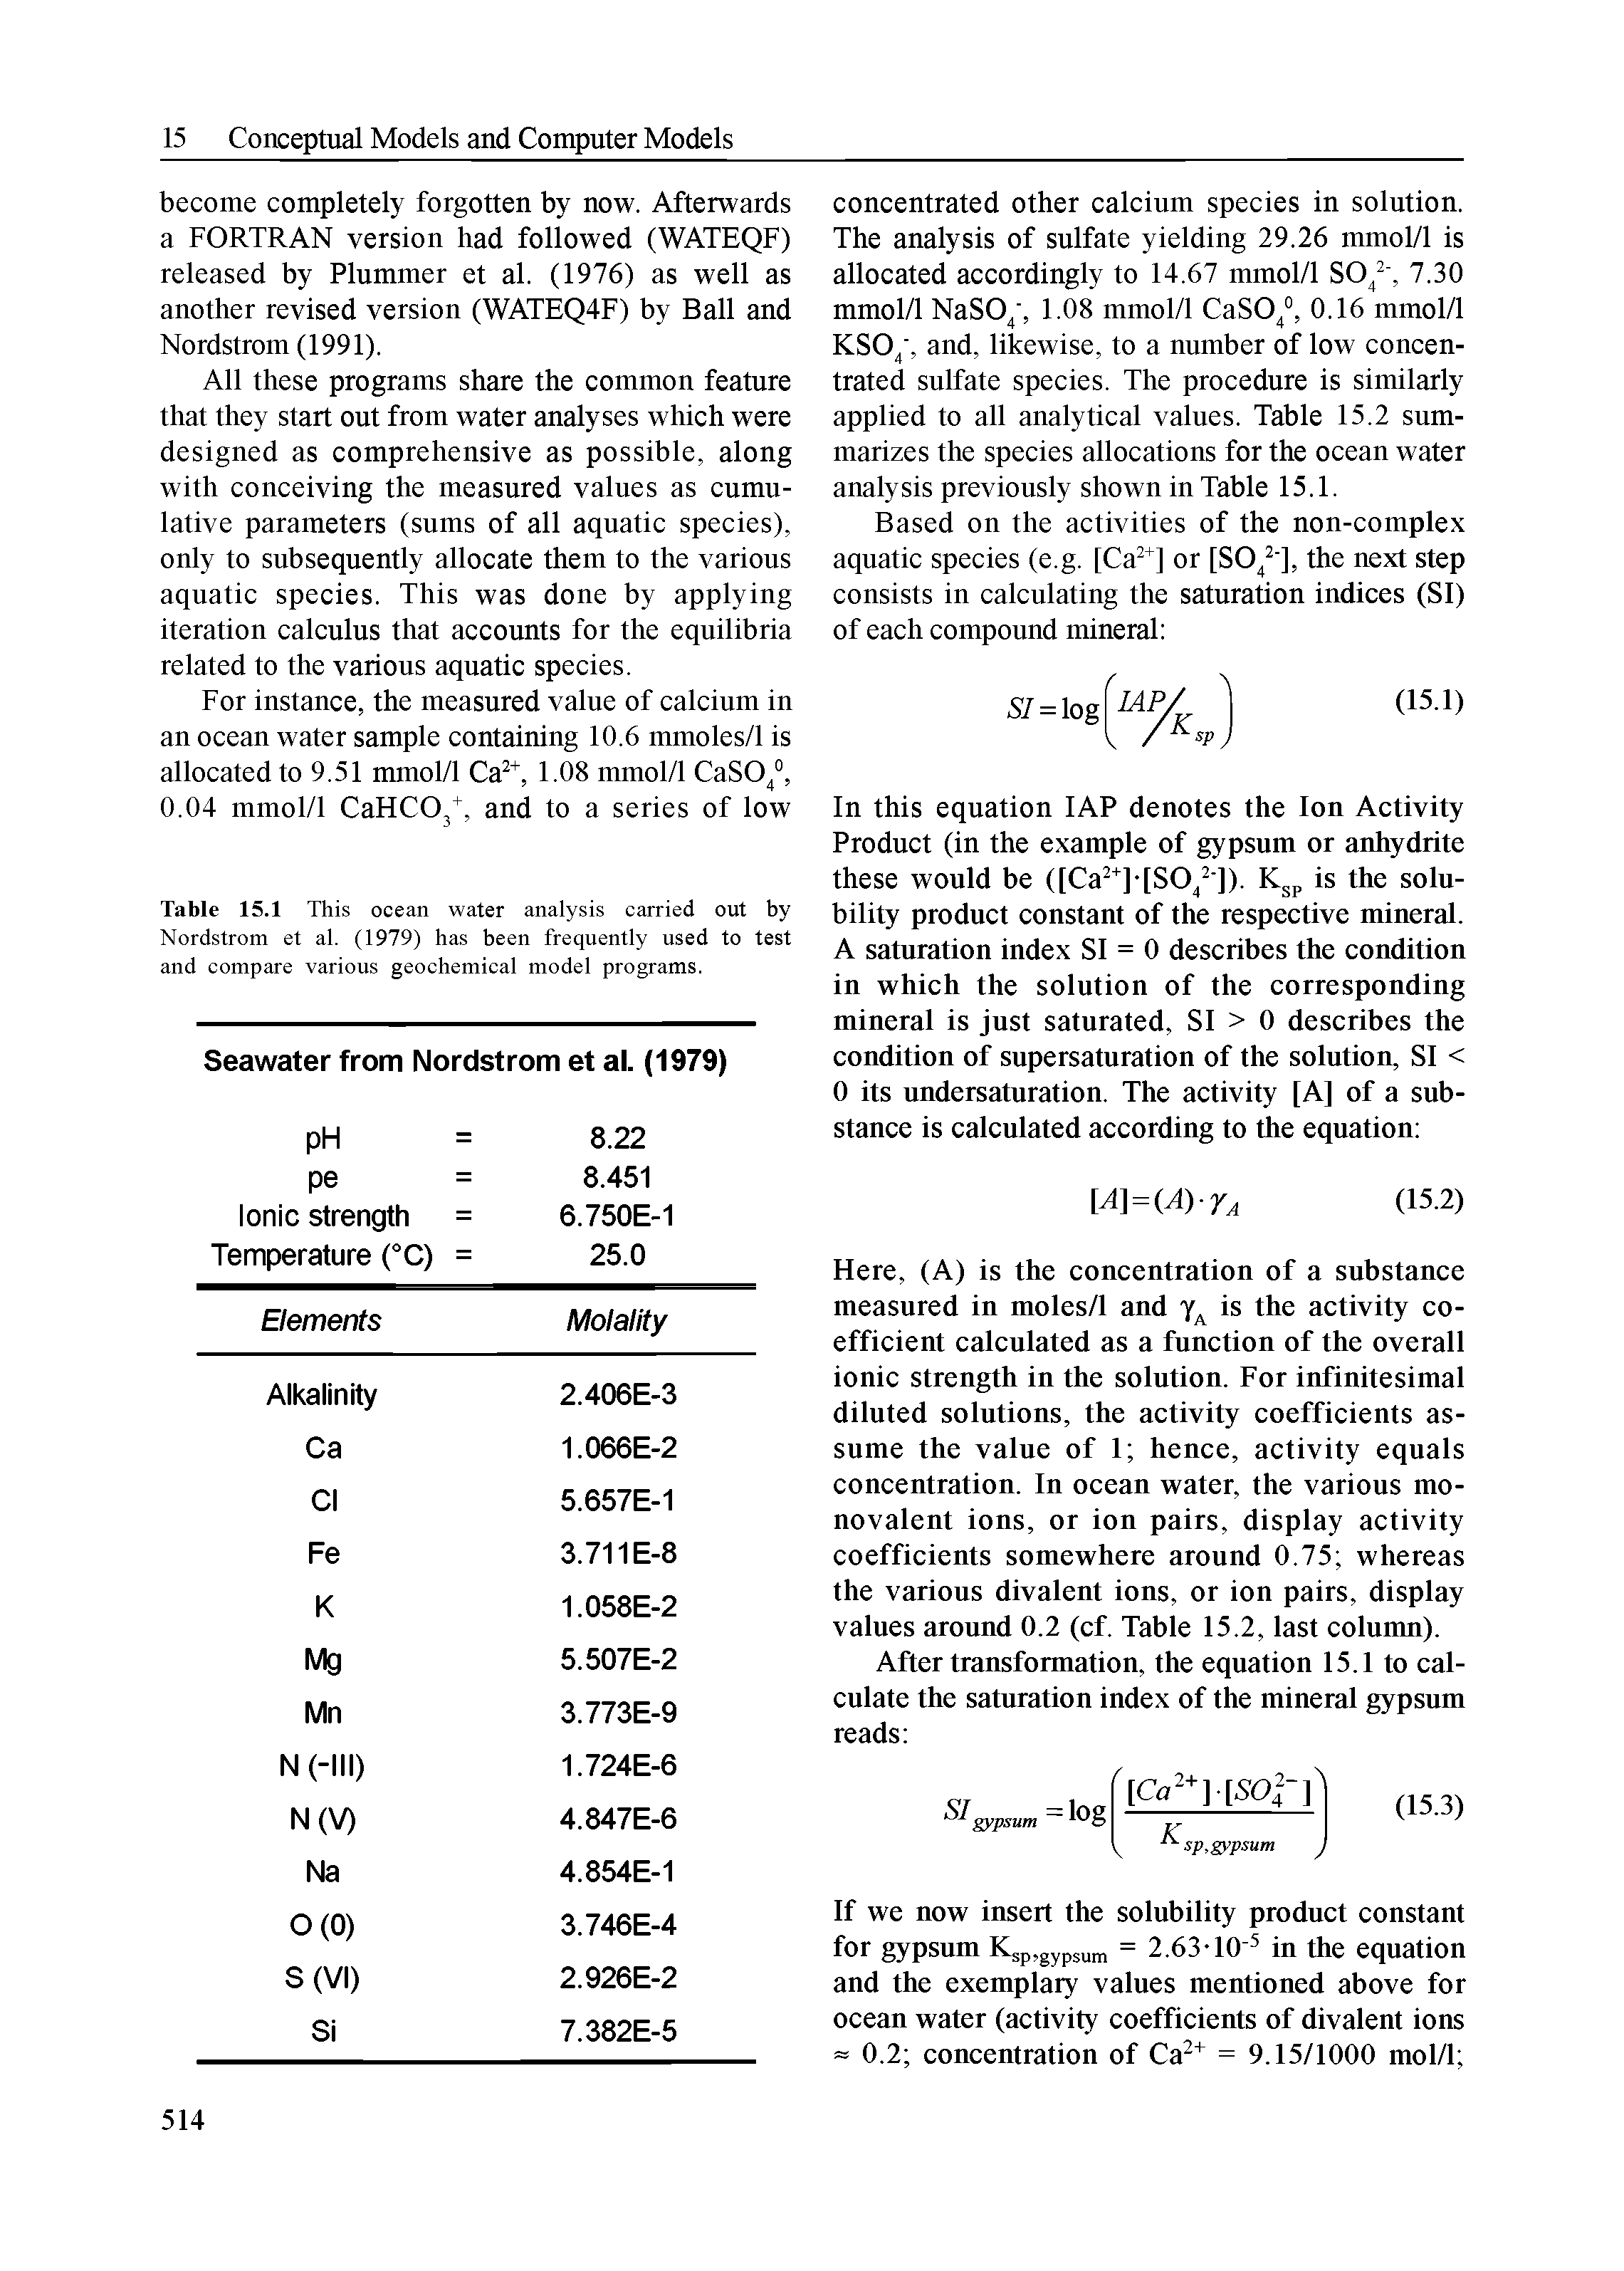 Table 15.1 This ocean water analysis carried out by Nordstrom et al. (1979) has been frequently used to test and compare various geochemical model programs.